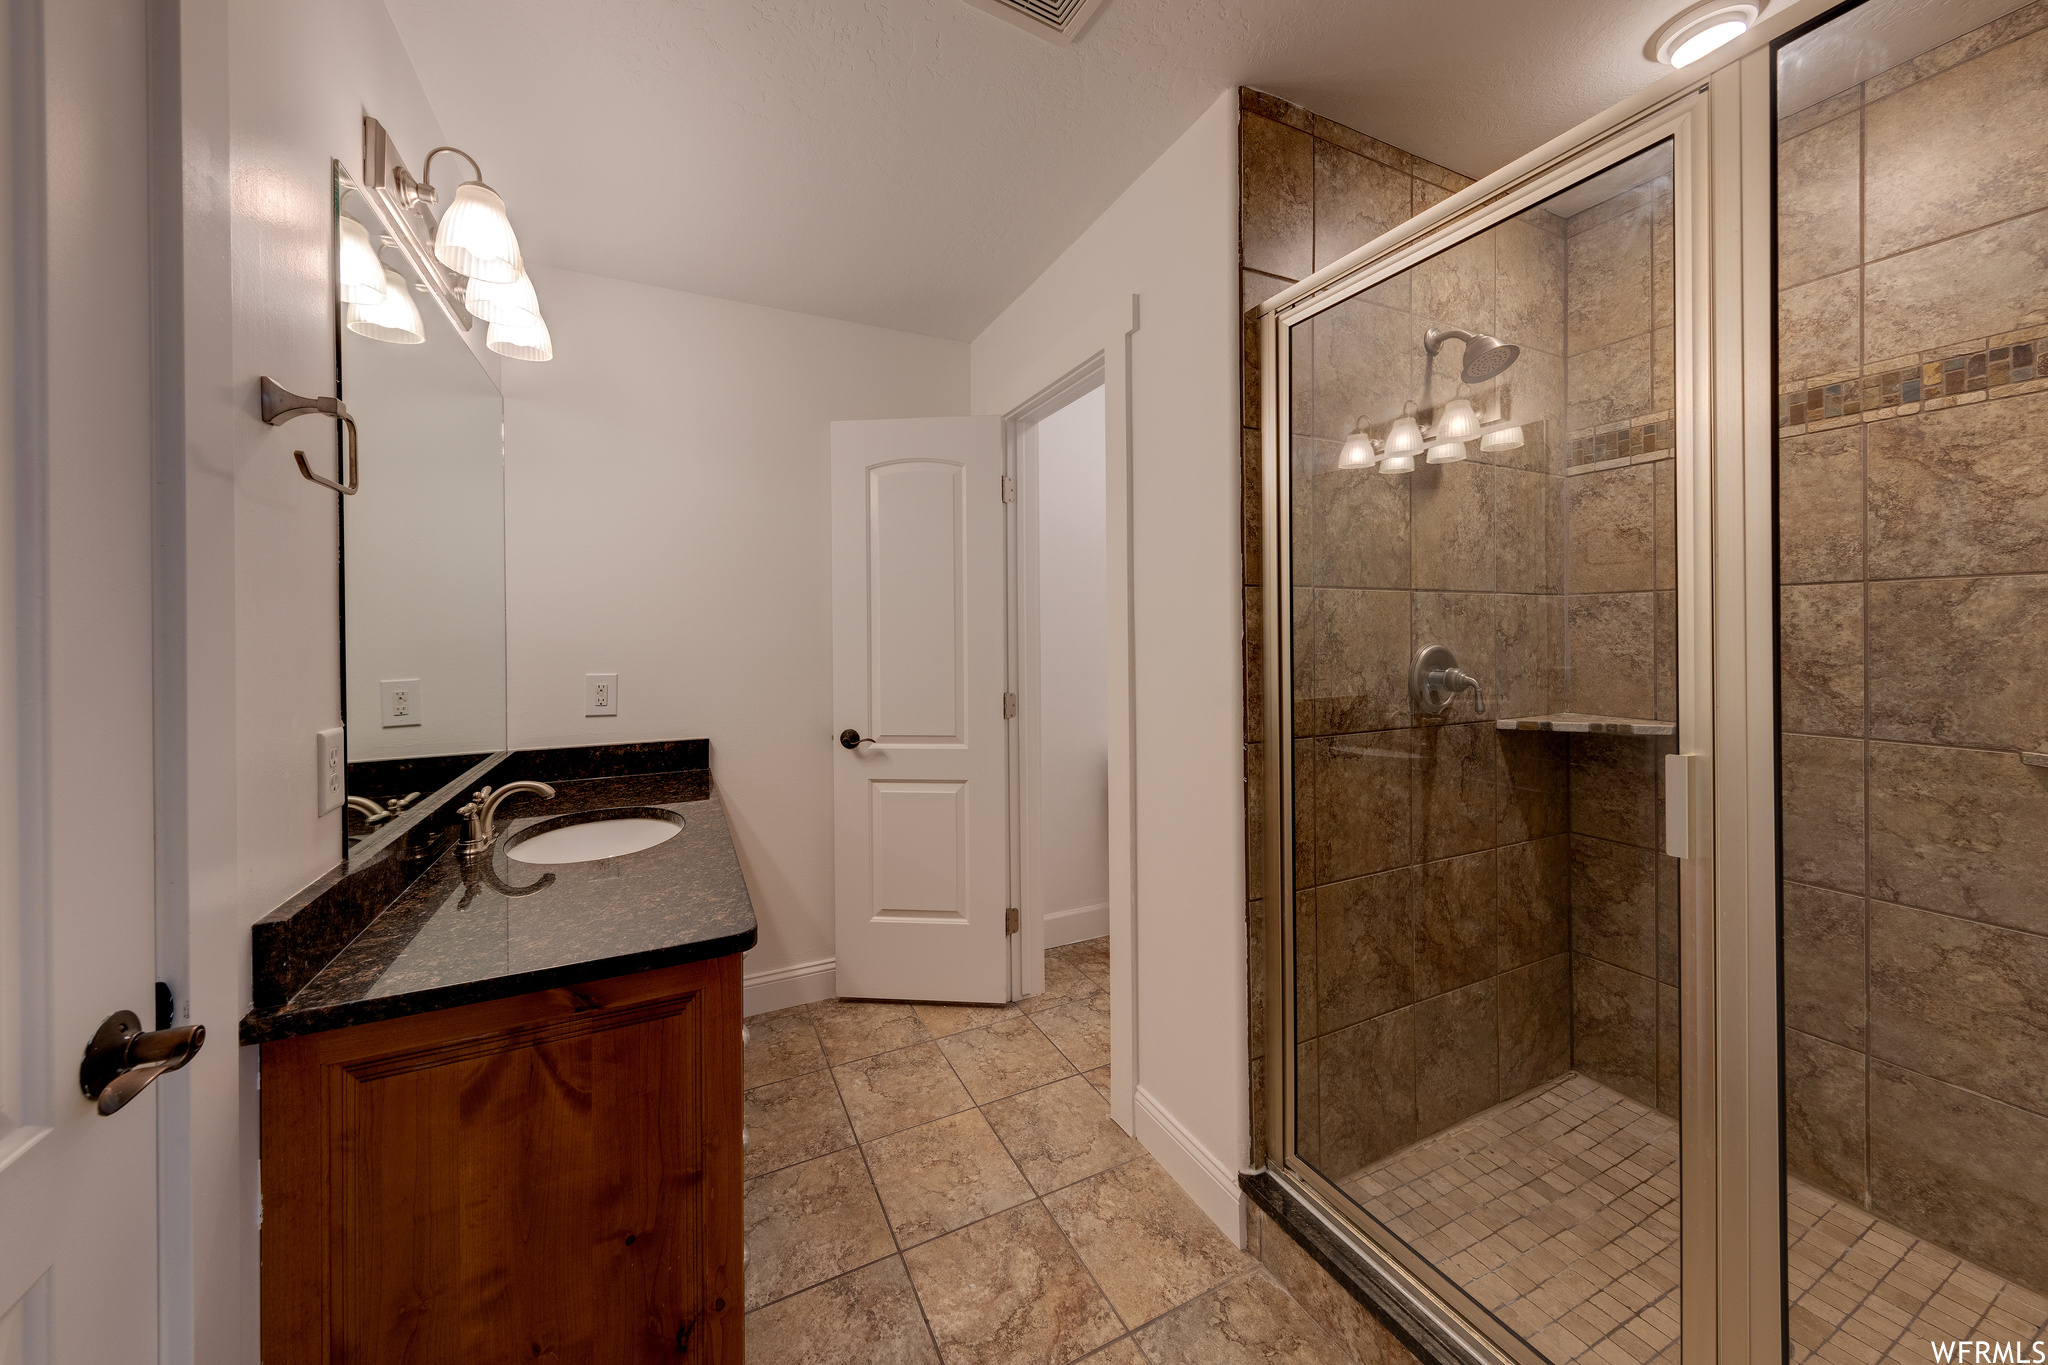 Bathroom featuring vanity with extensive cabinet space, mirror, a shower with door, and light tile floors